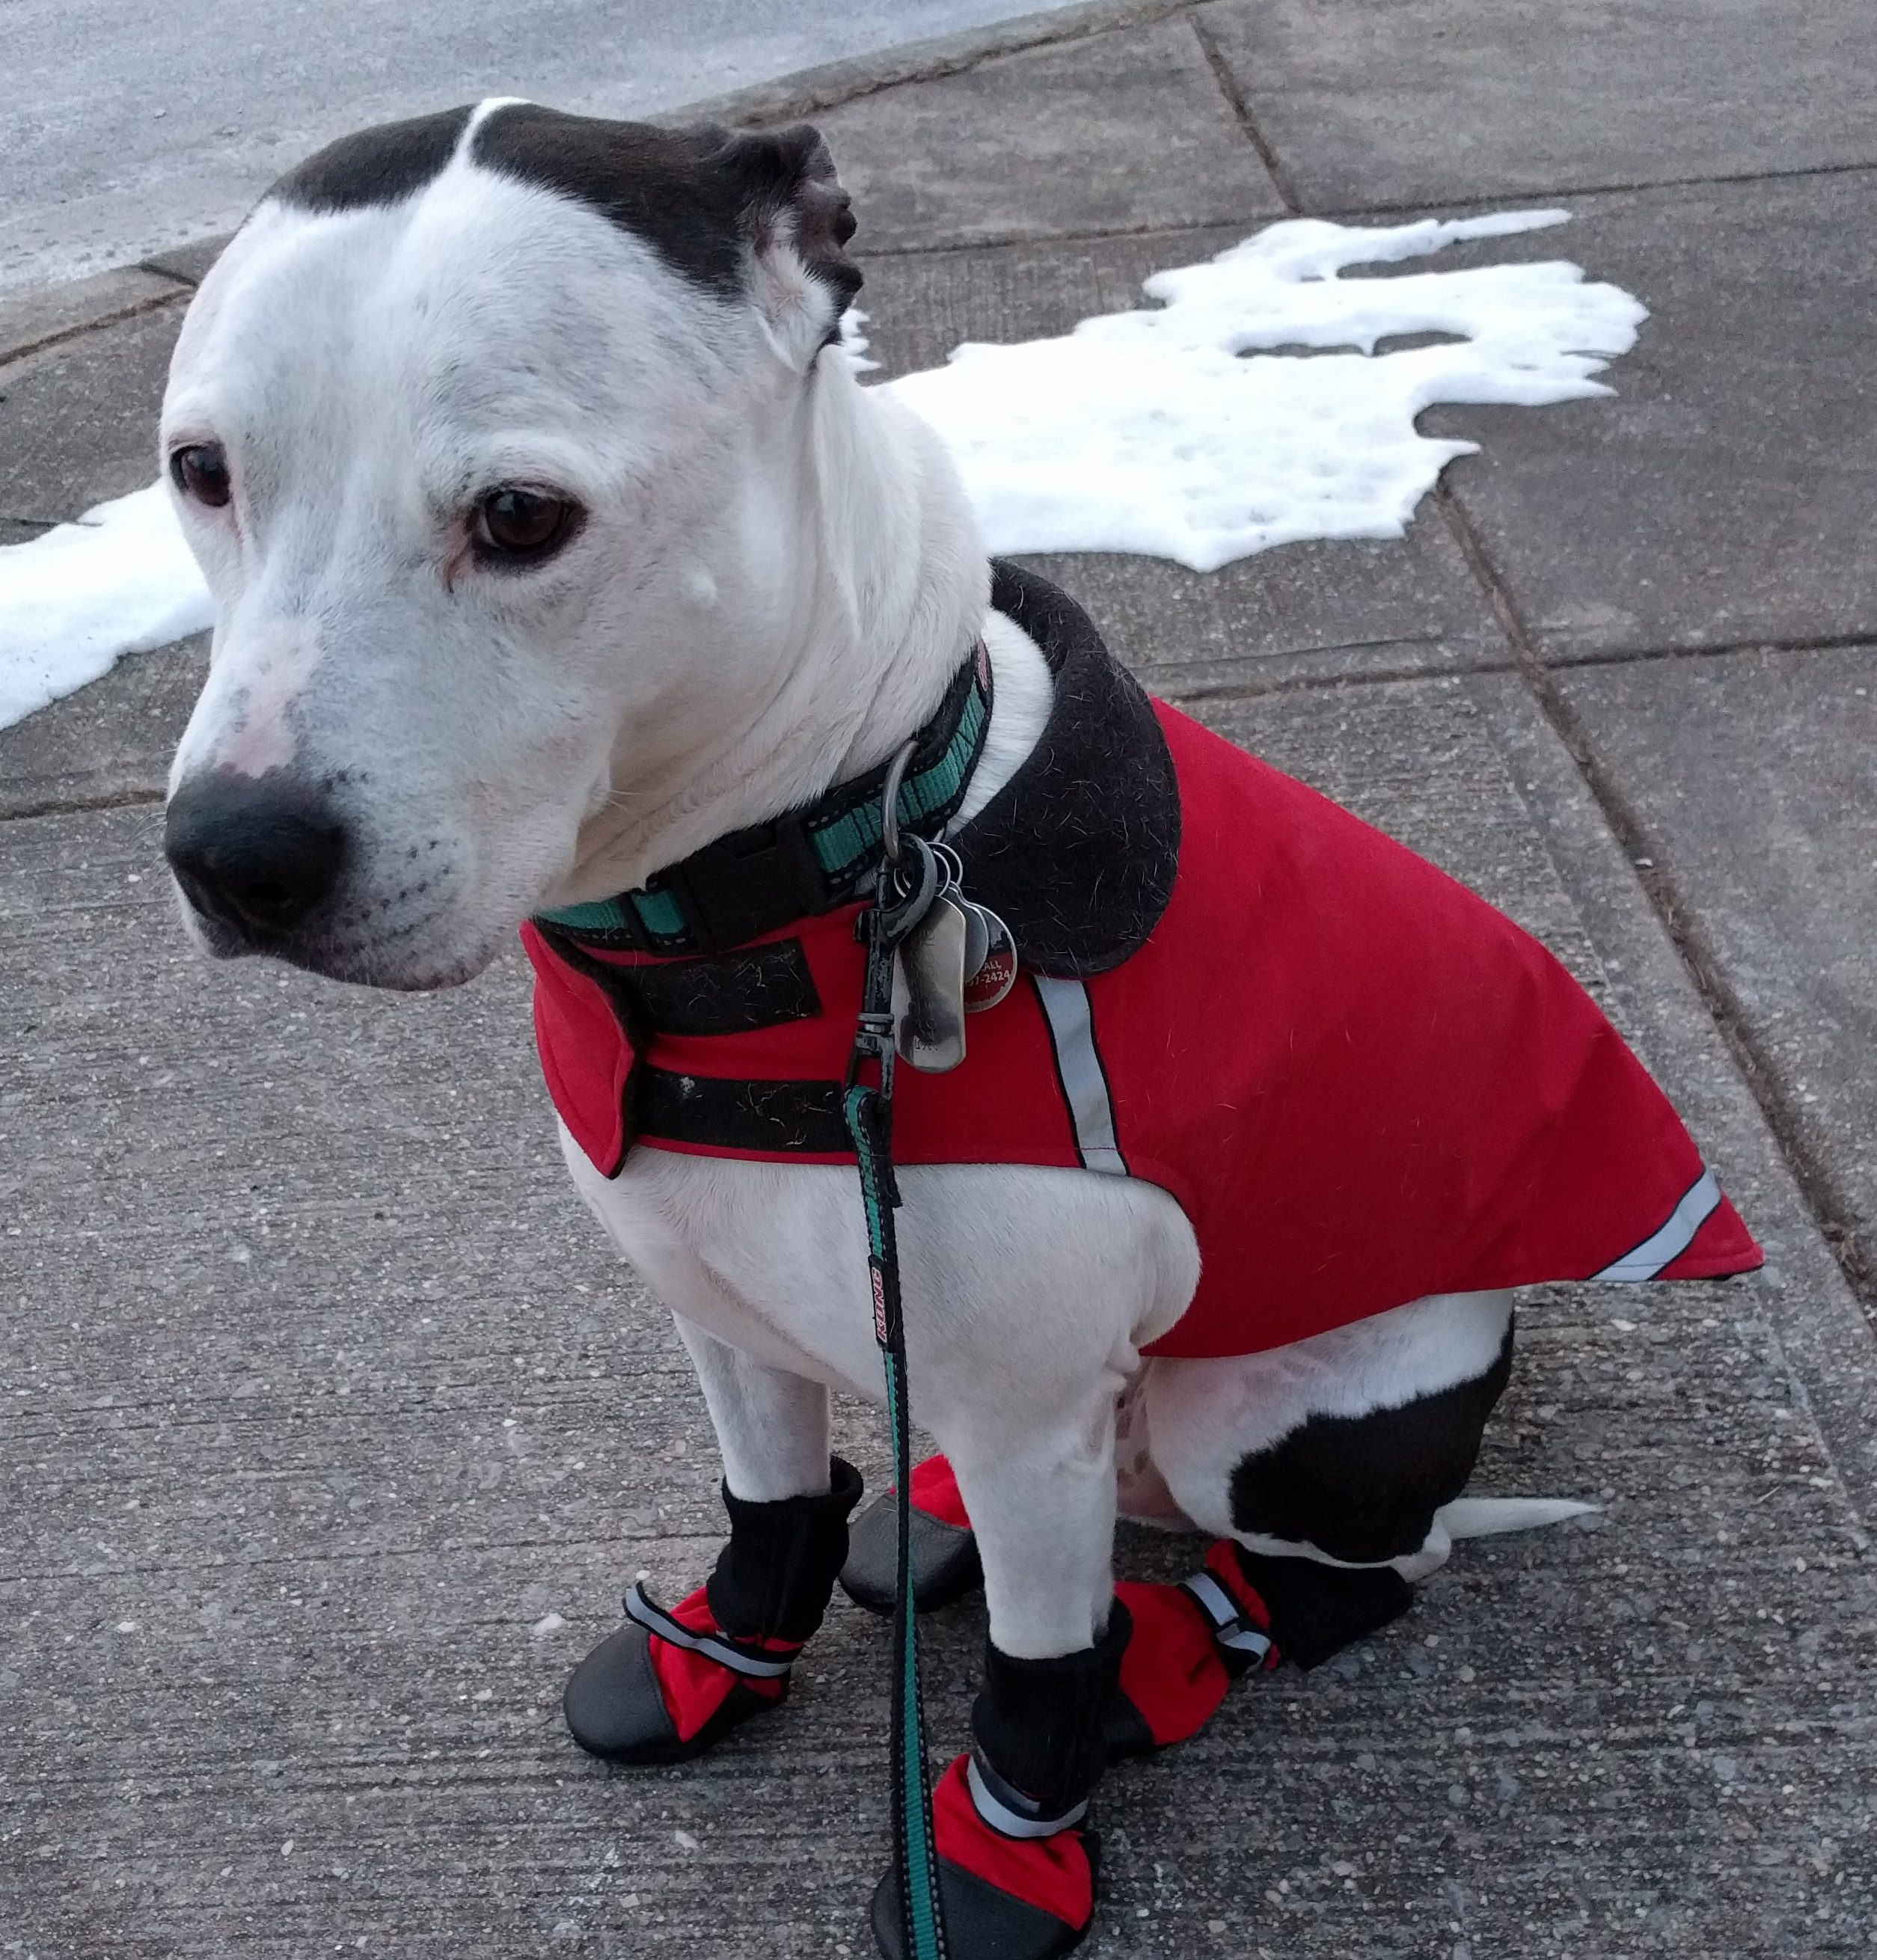 Maxtla rocking the red jacket and boots.